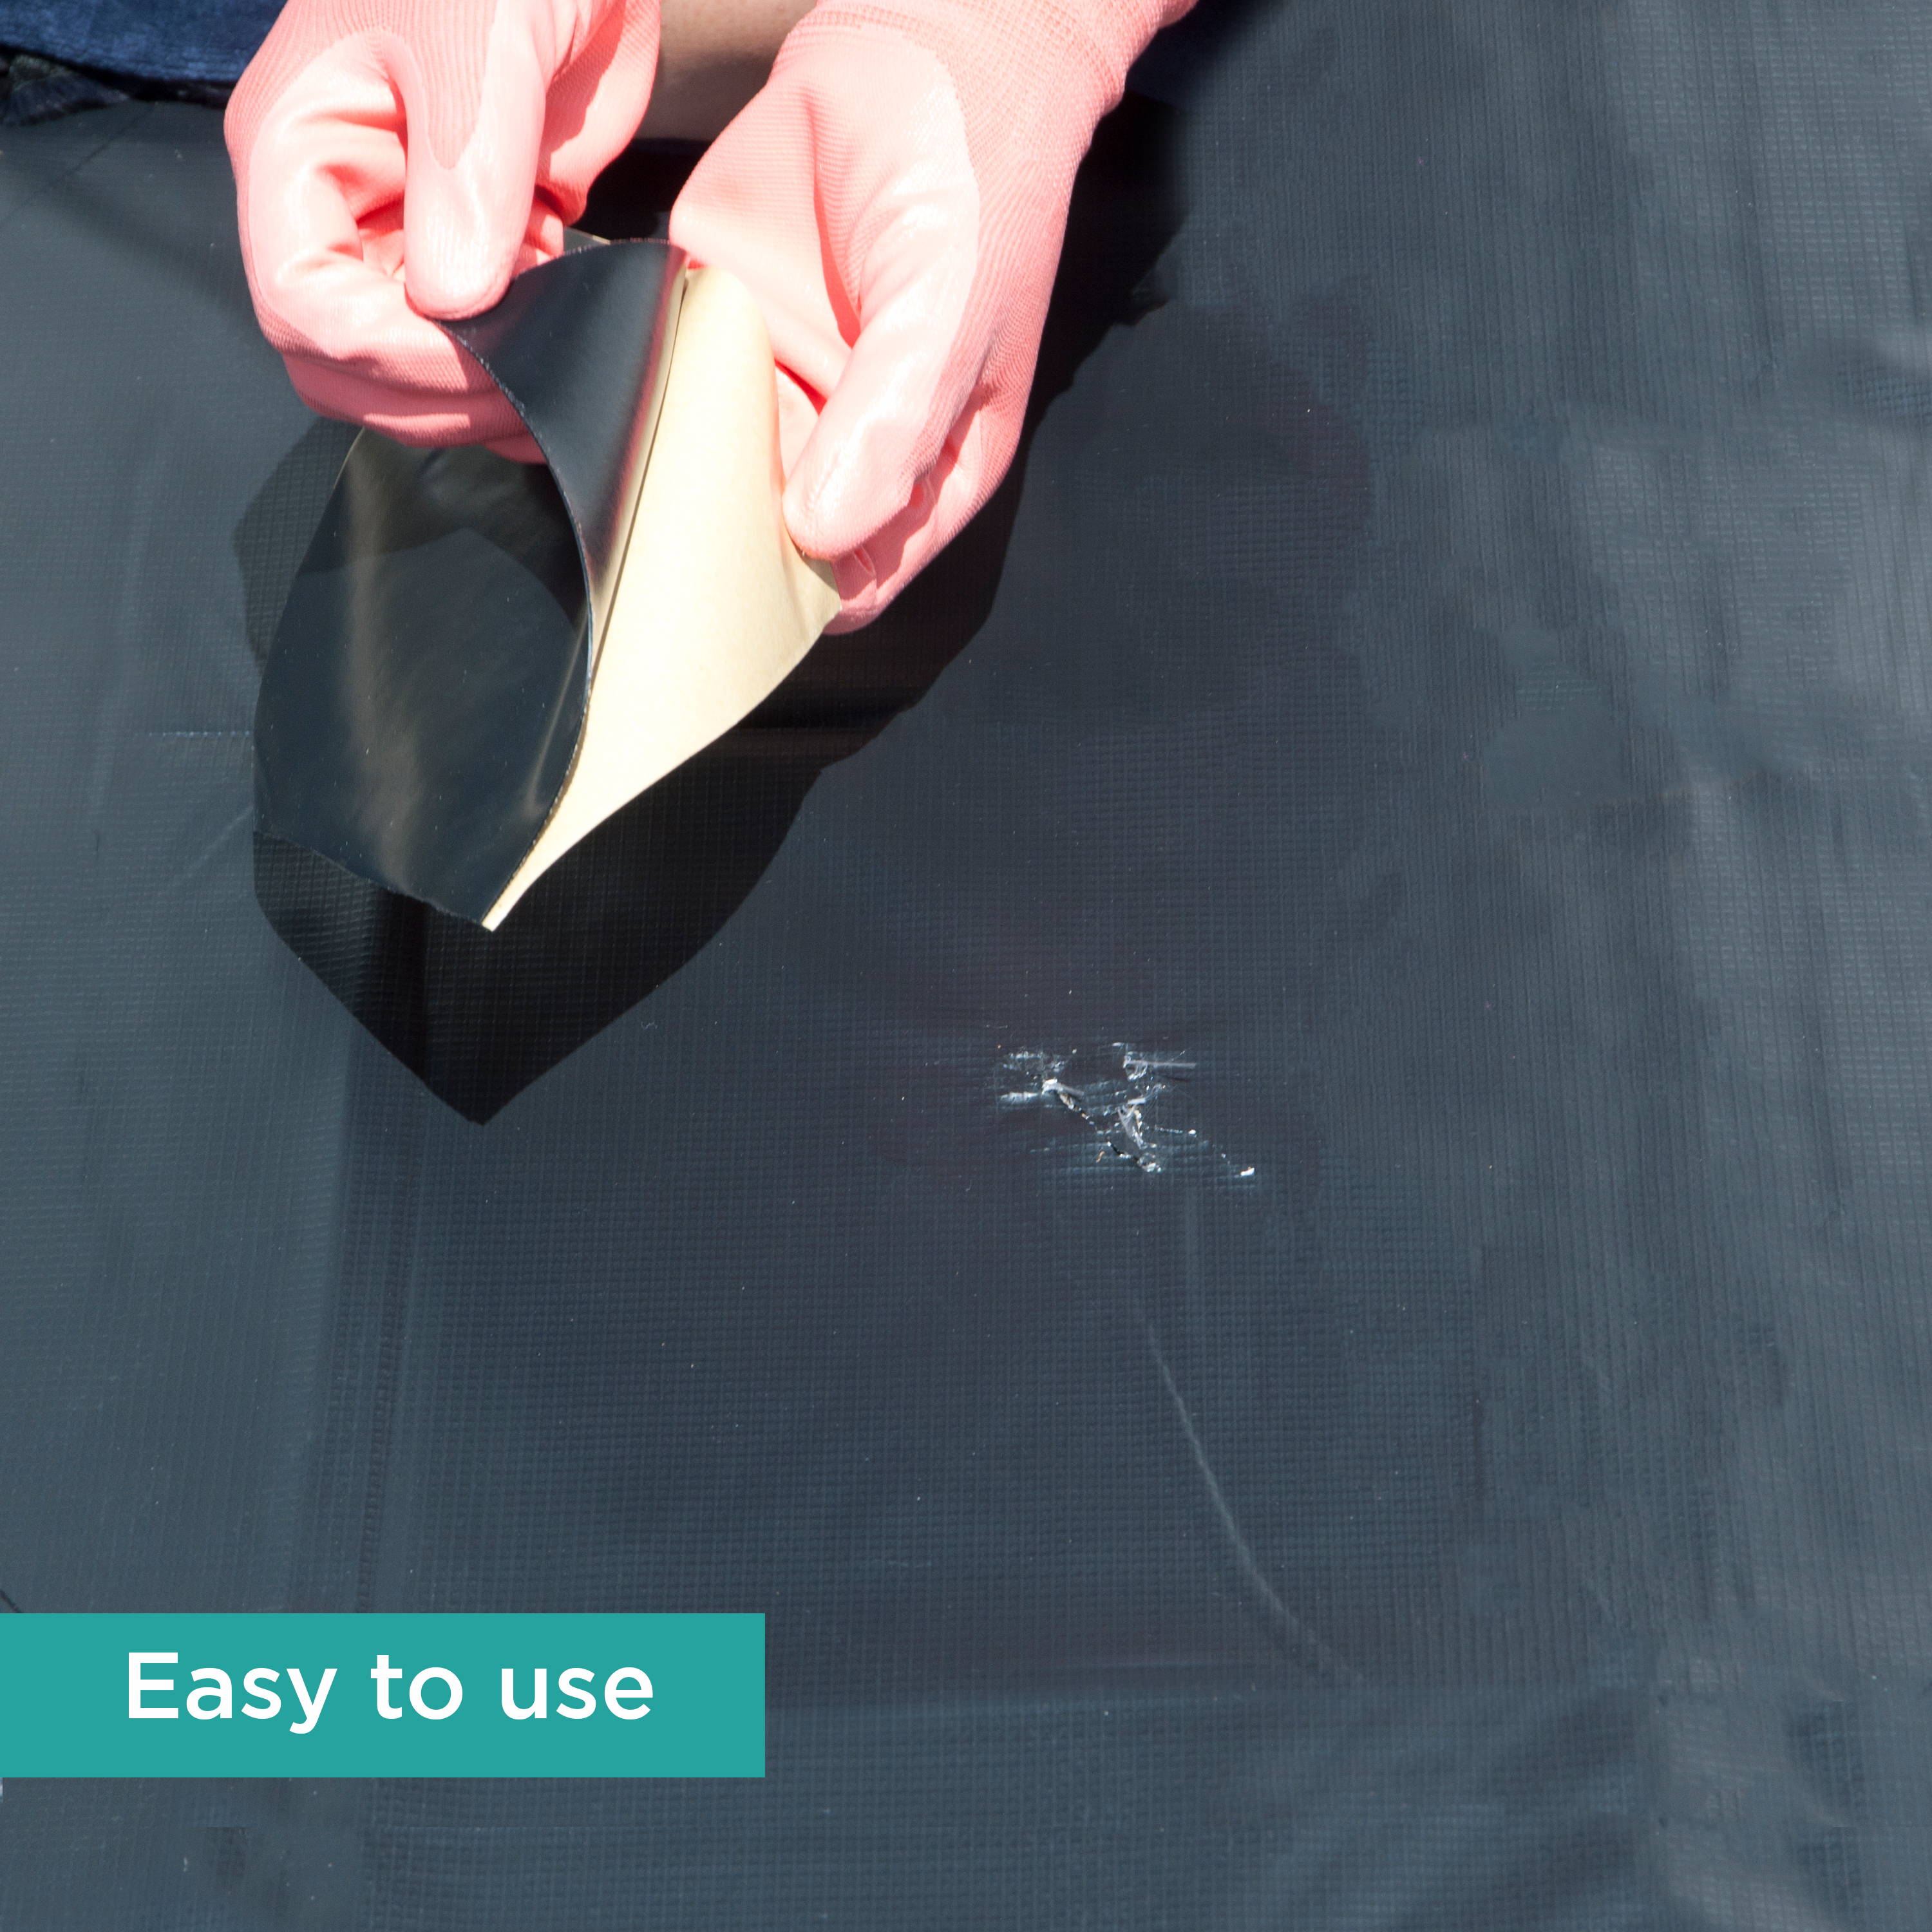 Pond liner repair patch is easy to use